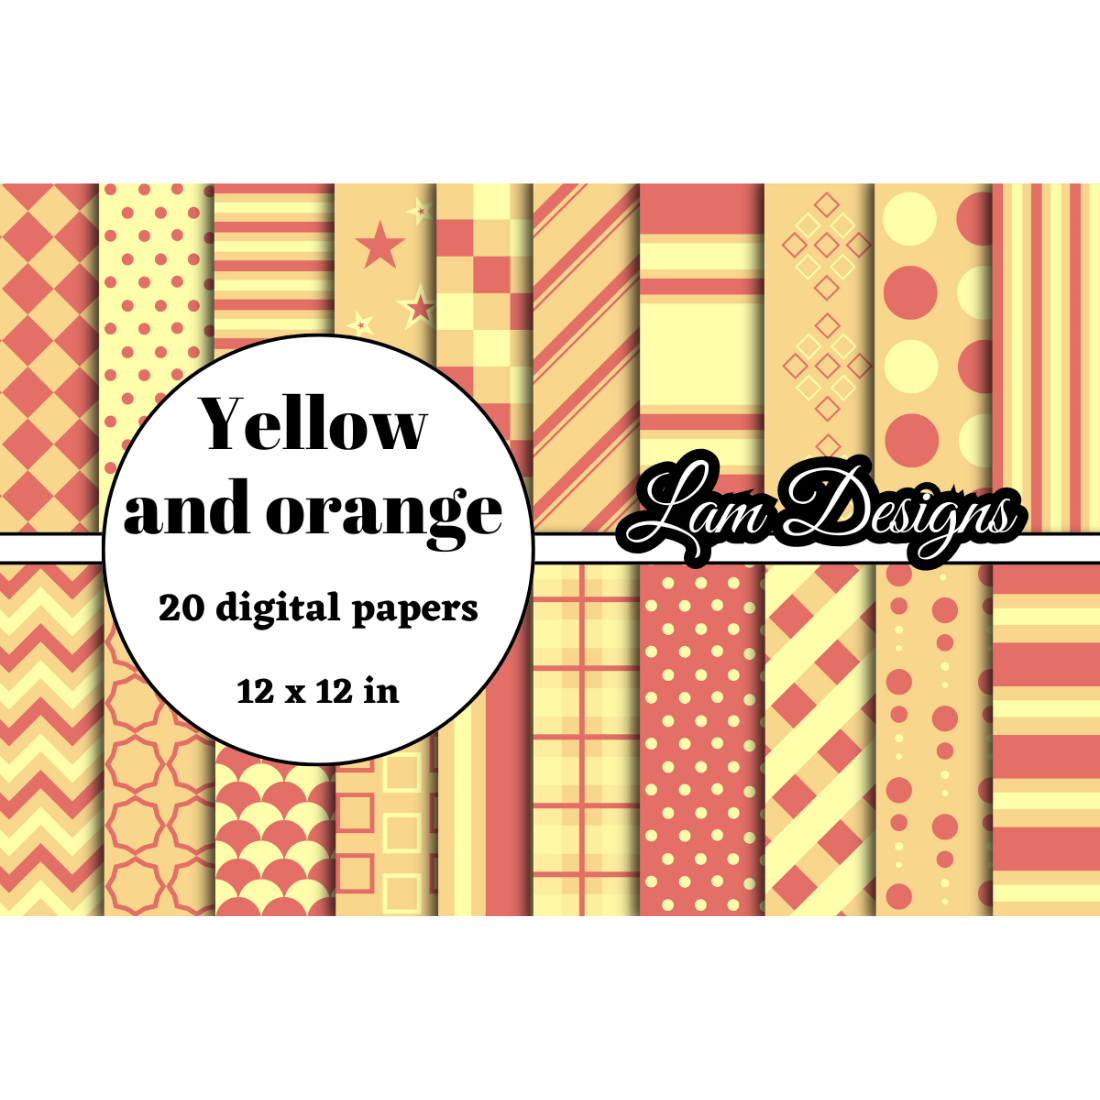 Yellow and orange digital papers preview image.